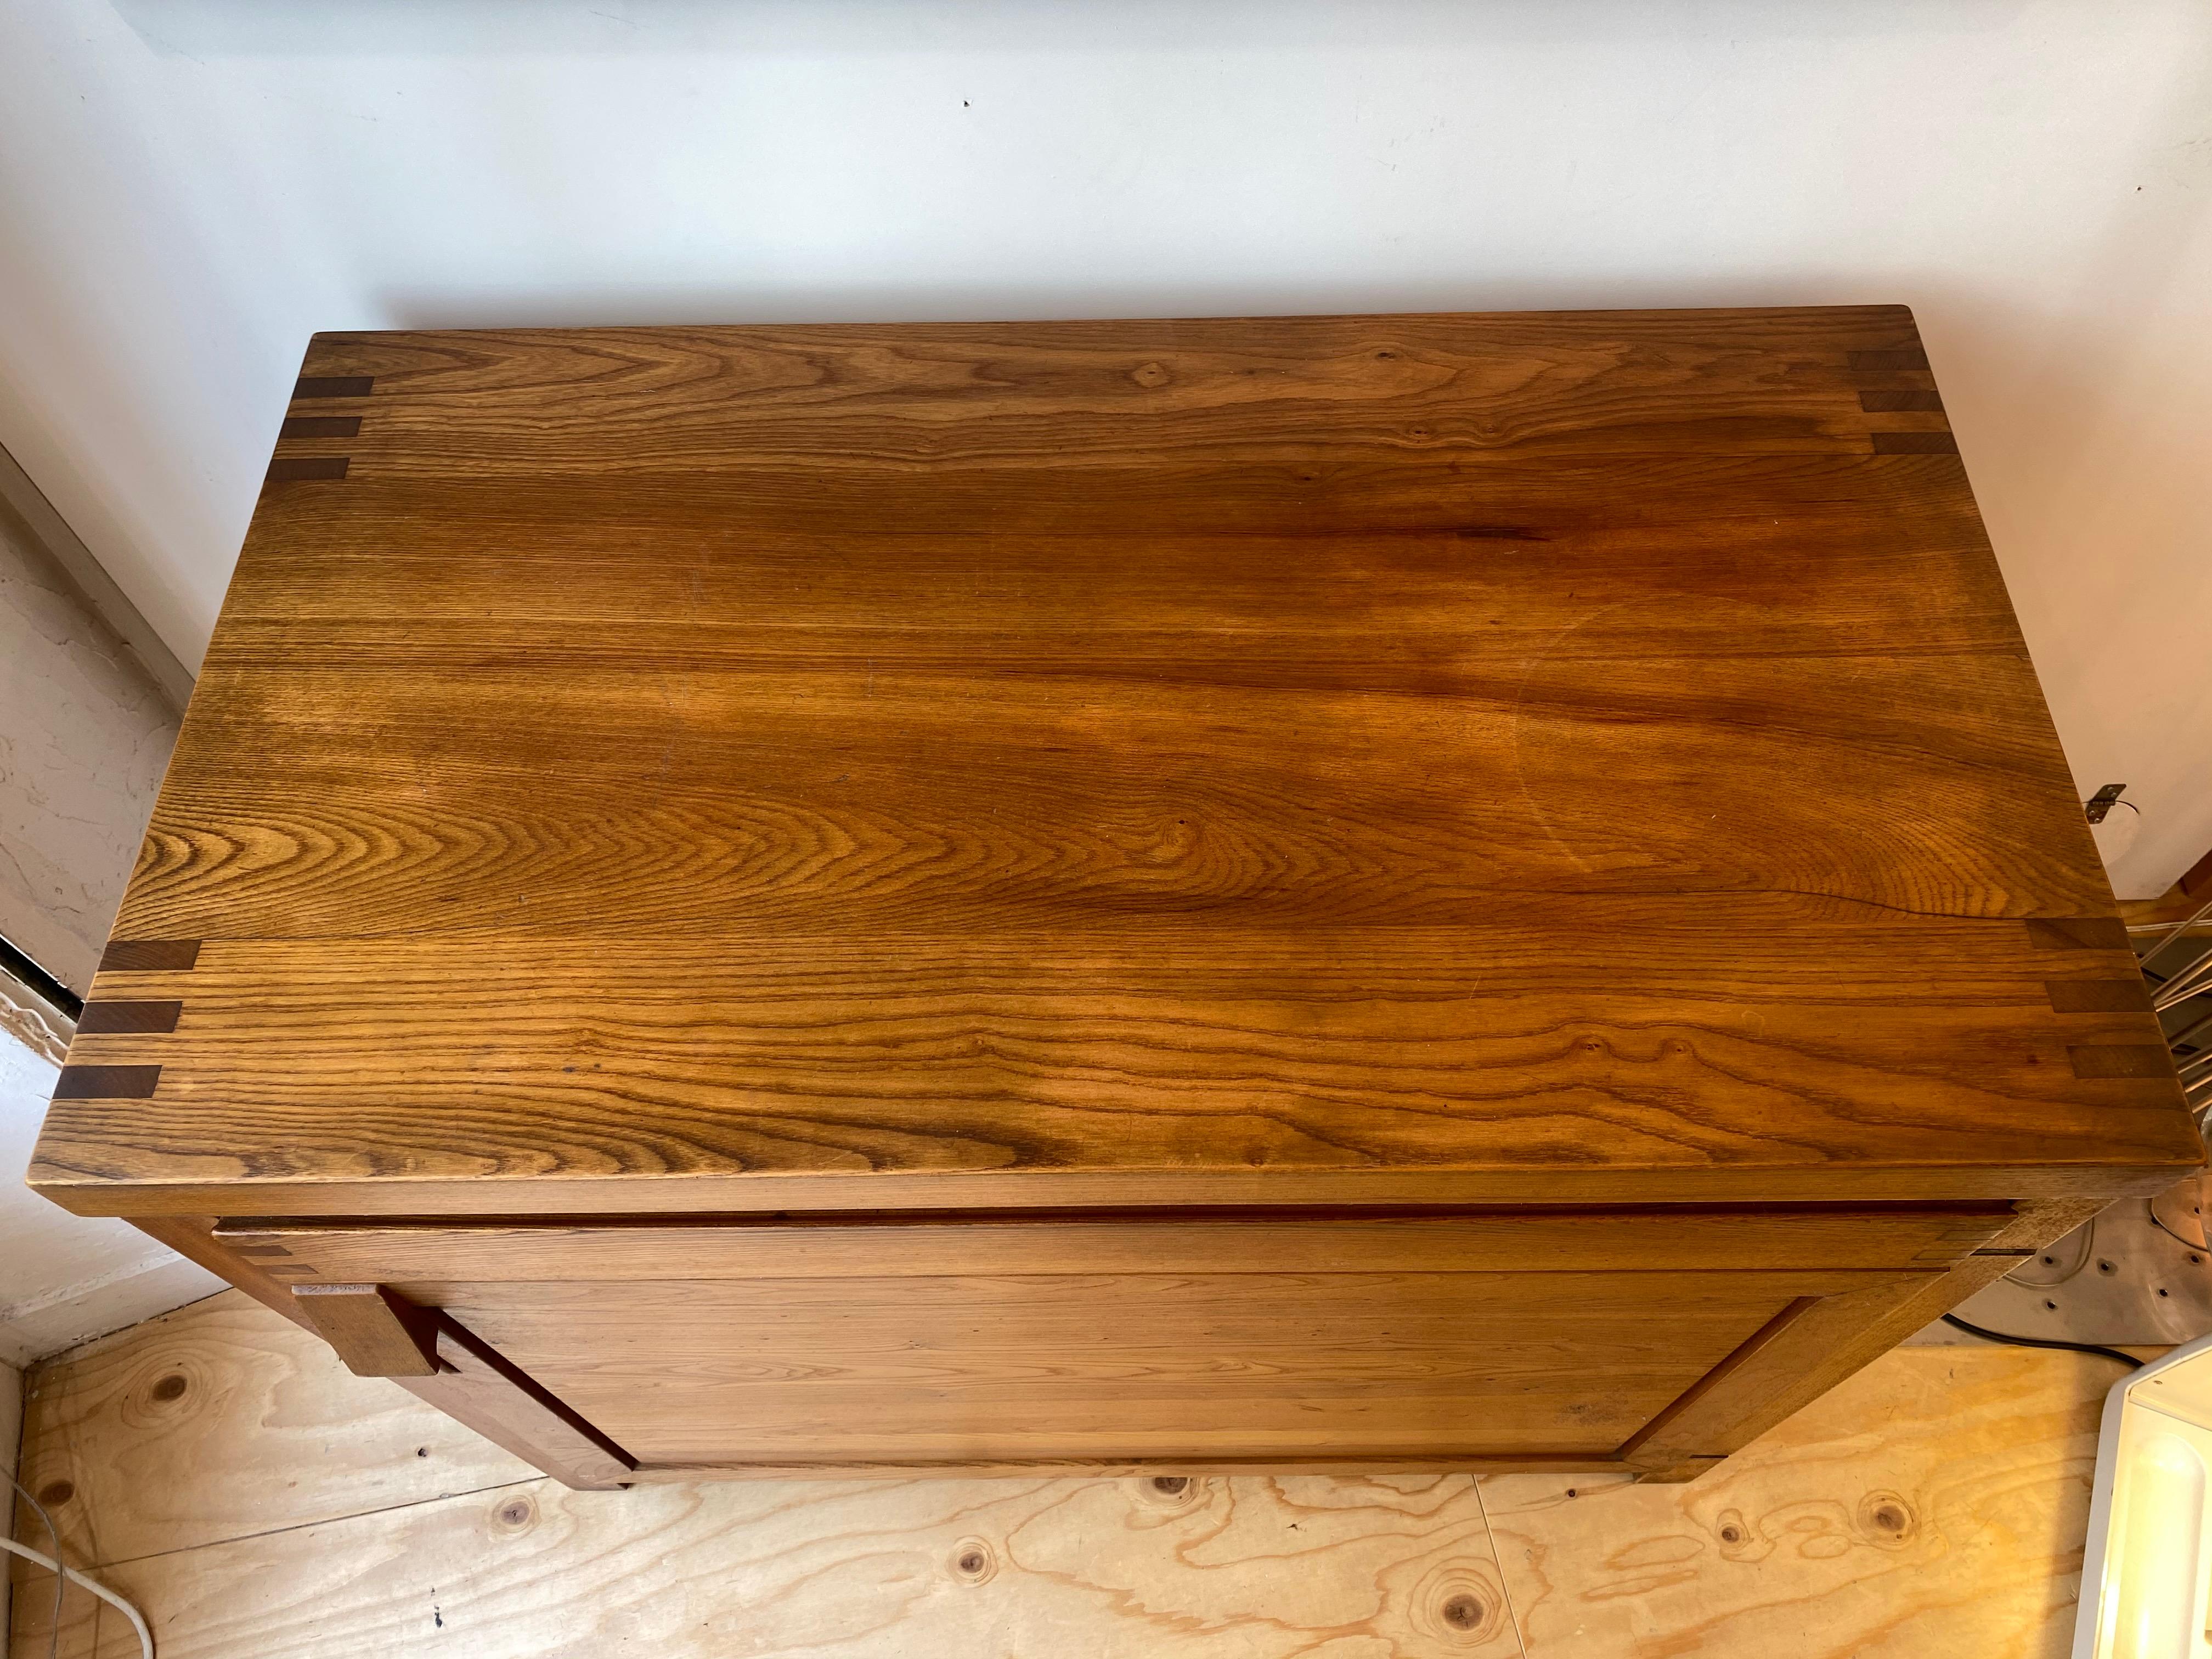 Pierre Chapo R09 
Piece of furniture in solid elm with a support height
Openable by a drawer in a belt and by a door leaf
circa 1975.
Measures: H 84 x W 96 x D 53
3900 Euros.